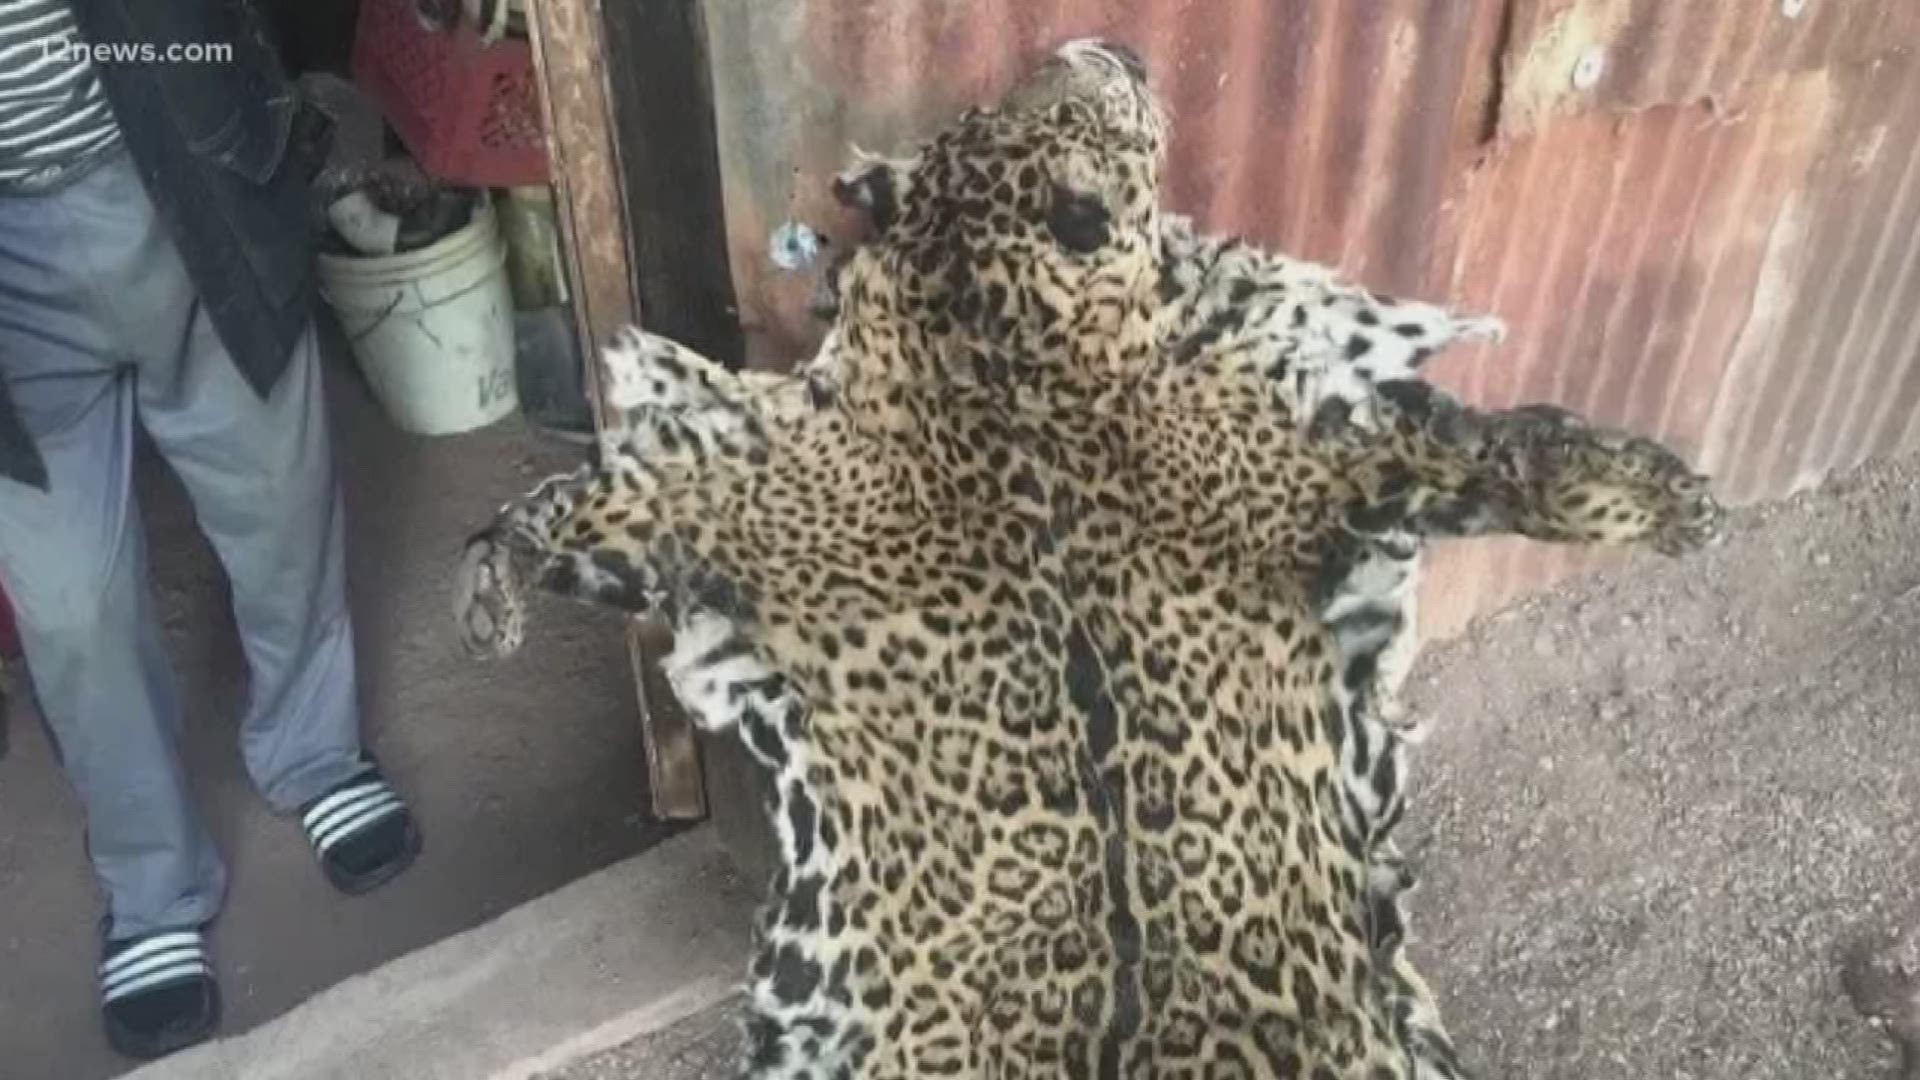 A photo showing a jaguar pelt matched the markings of a jaguar seen in southeast Arizona in 2016, meaning the young male jaguar had been killed and skinned.